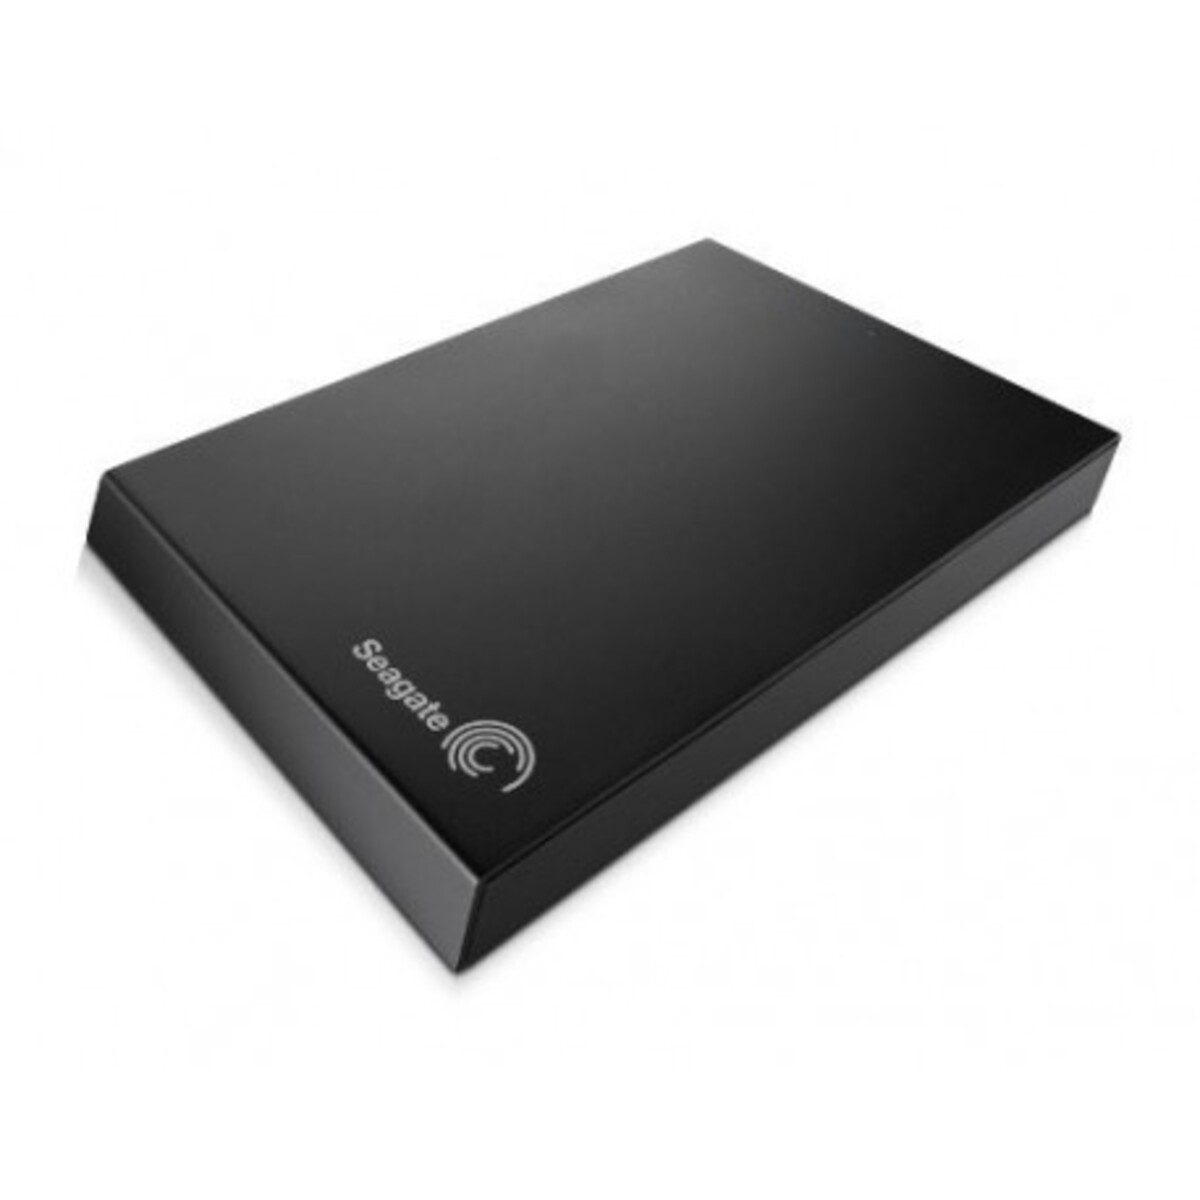 Seagate External HDD Expansion 1TB